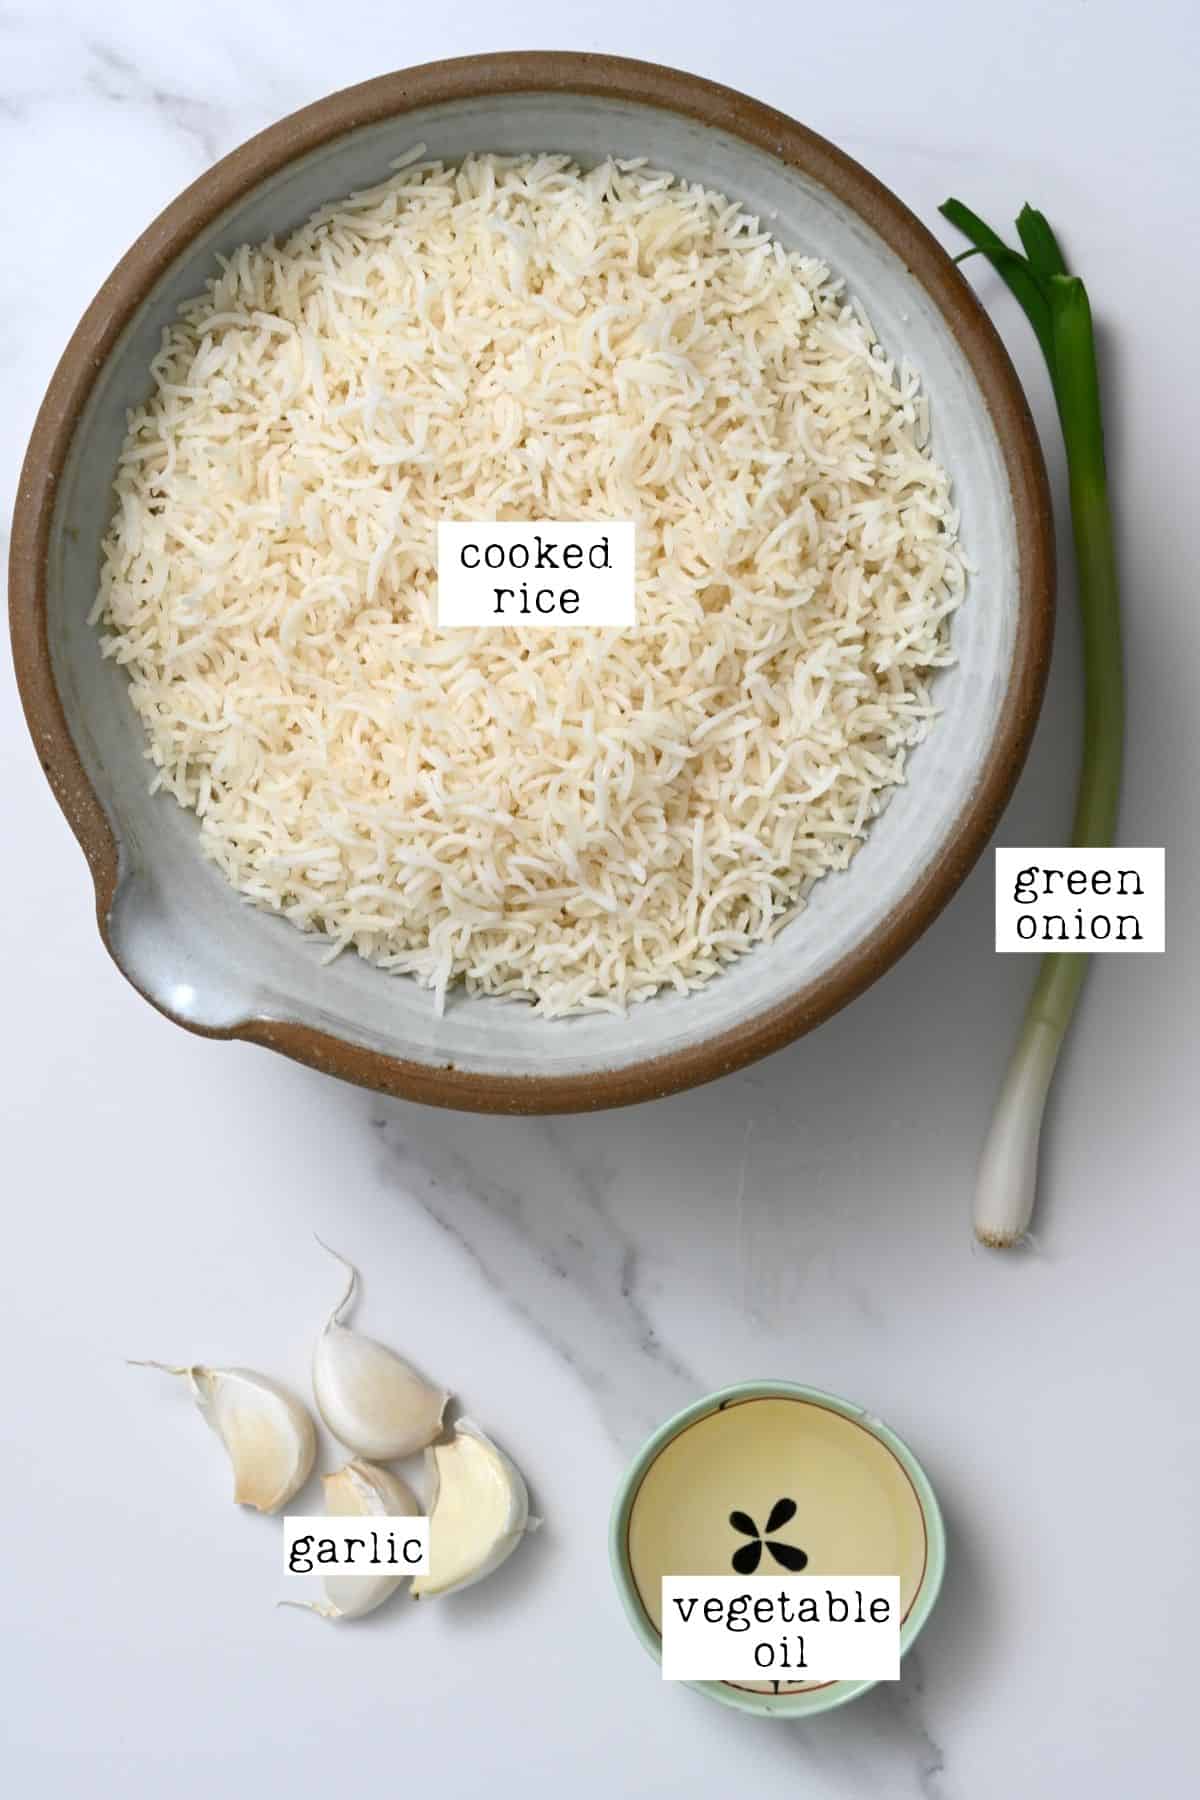 ngredients for garlic rice